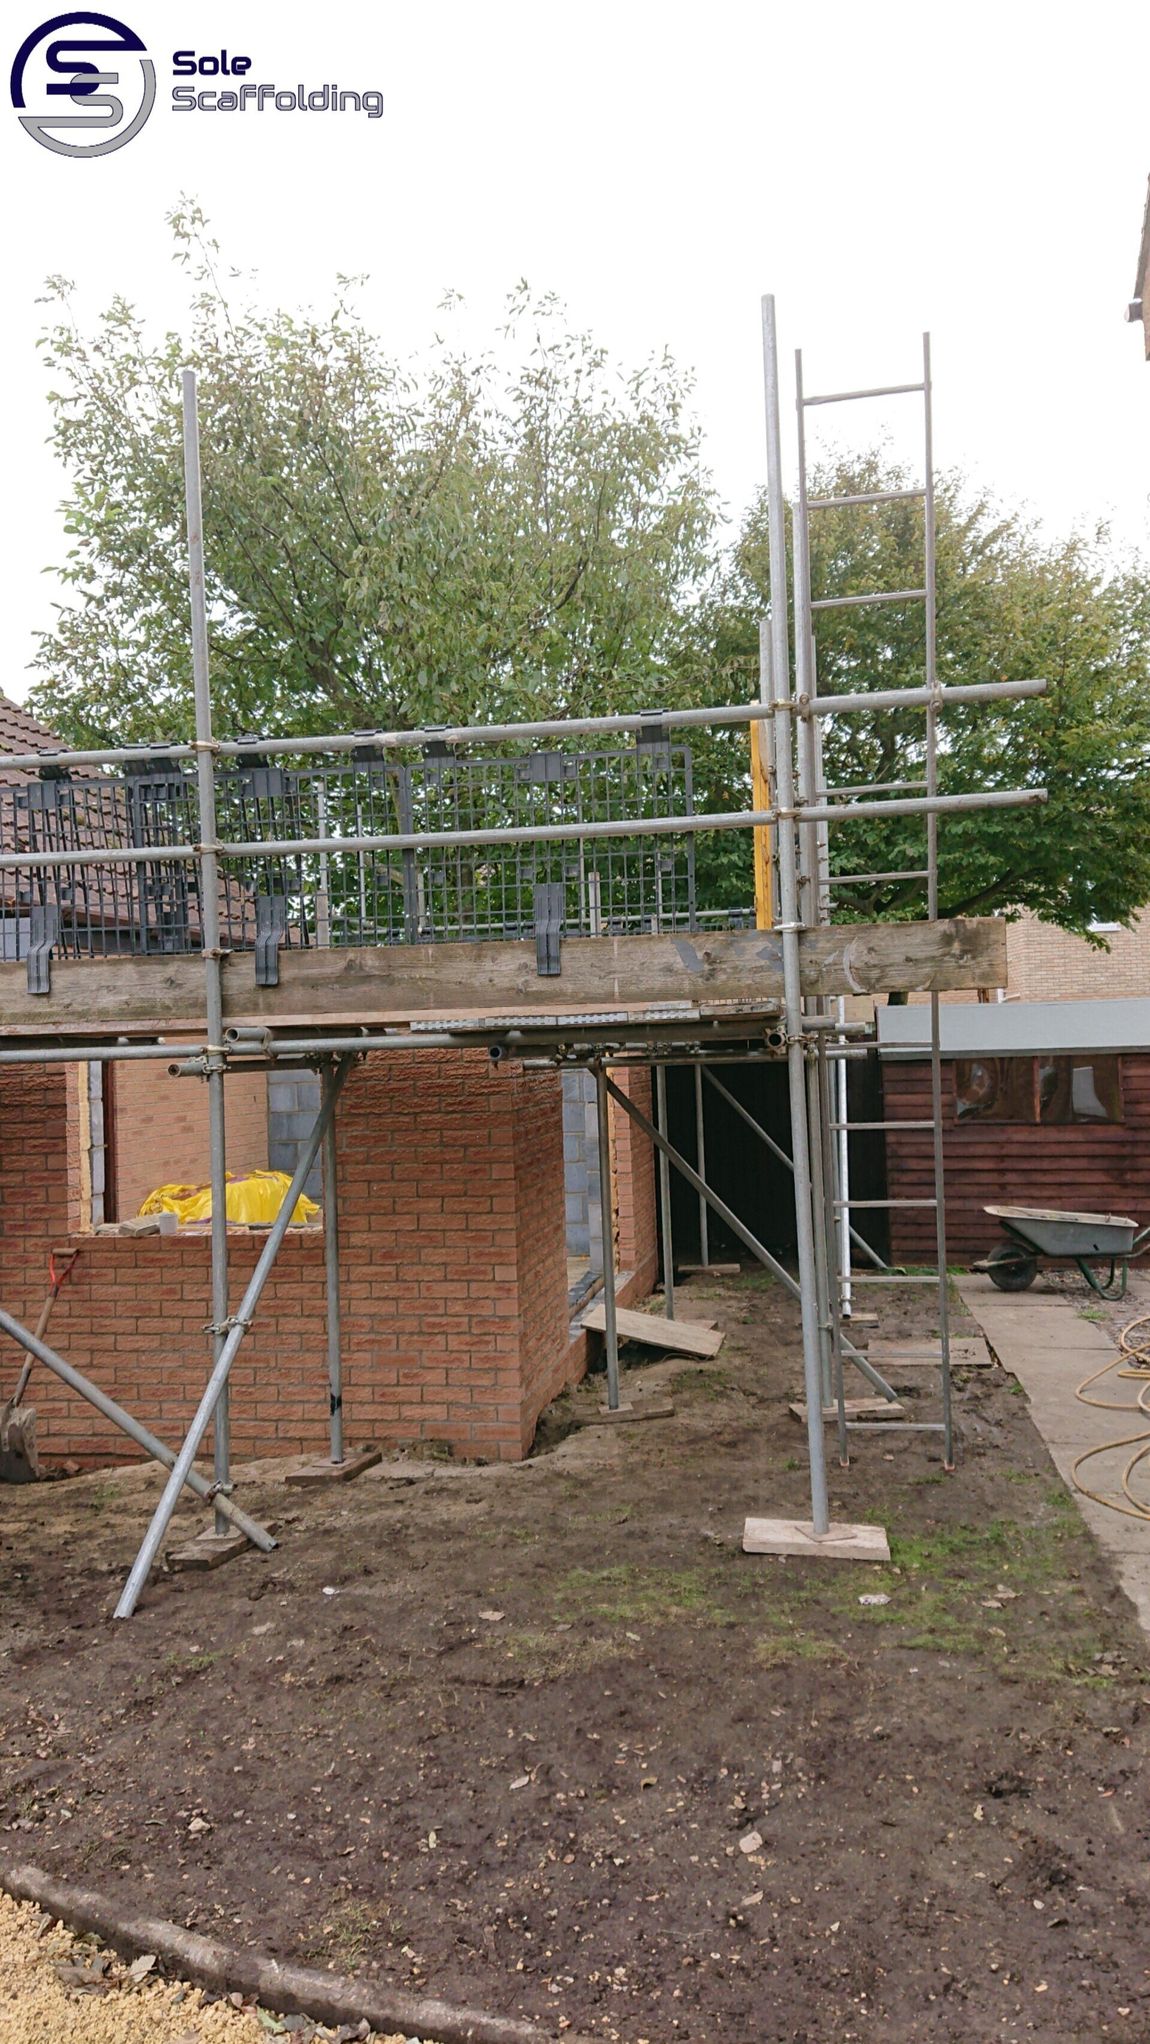 sole scaffolding - new build extention in March